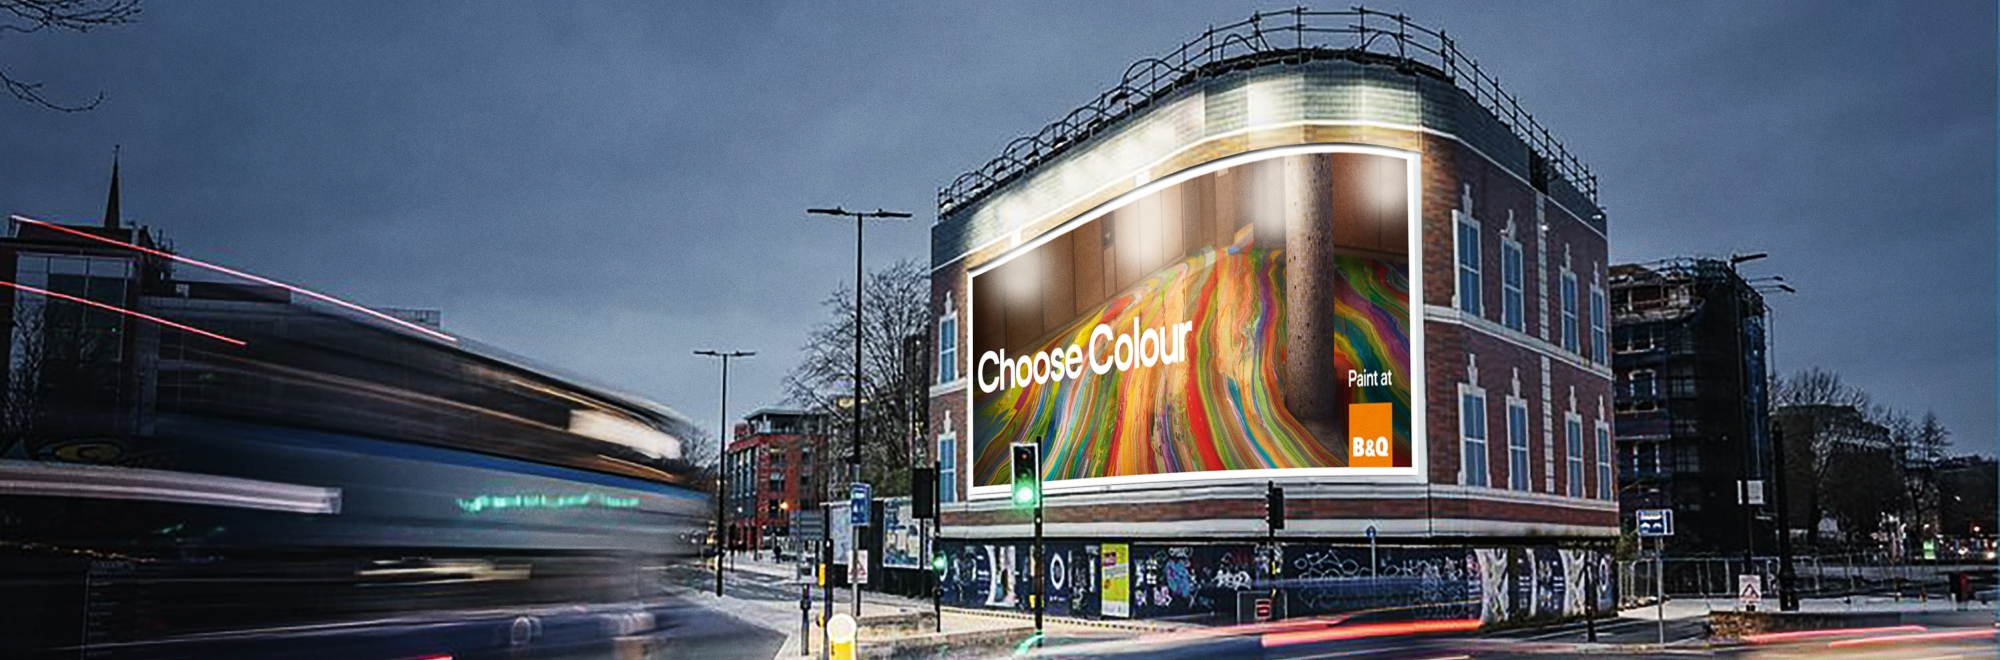 Choose Change: Artful installations to demonstrate the power of changing an interior with B&Q